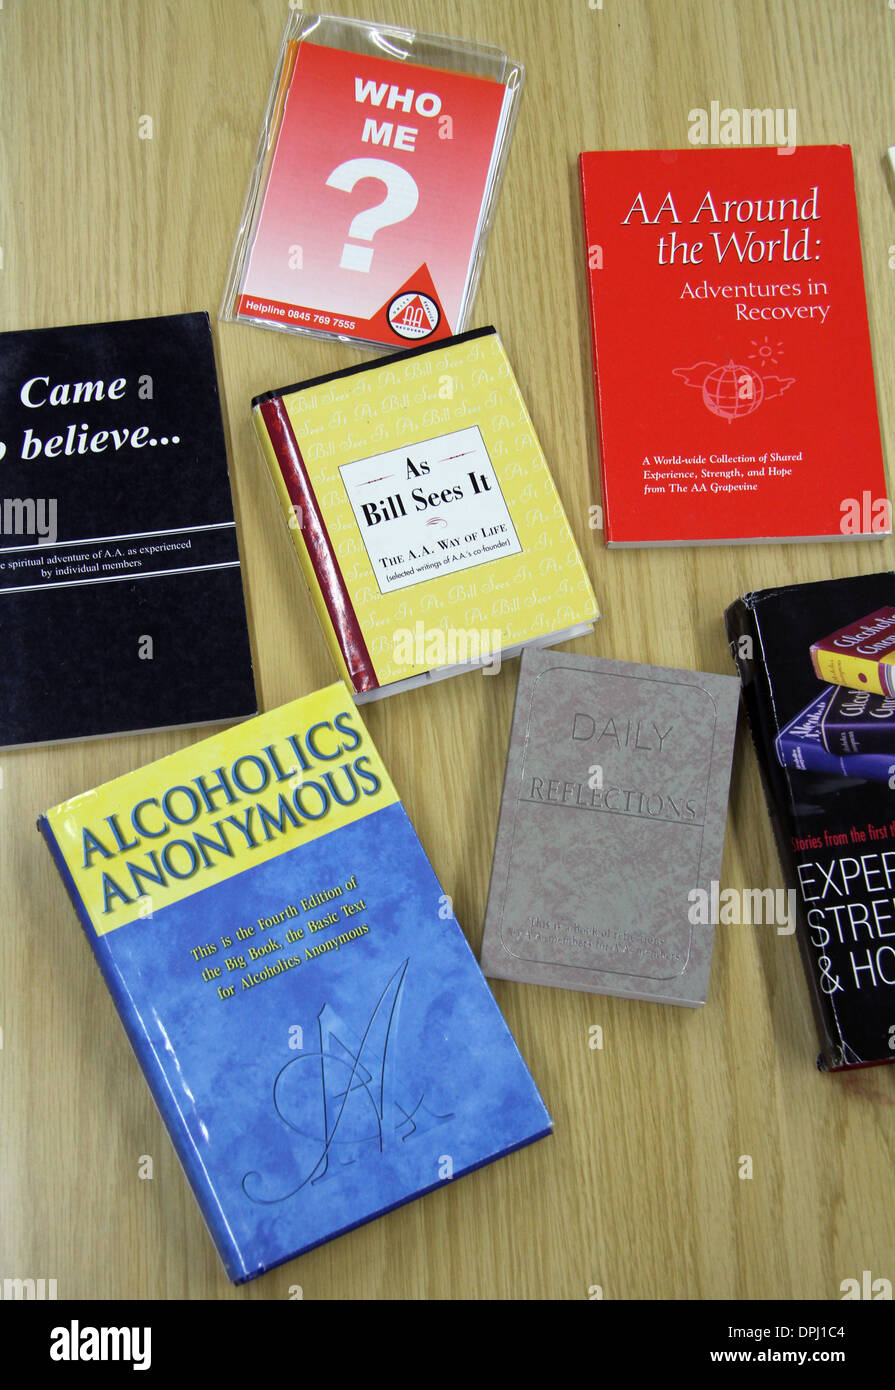 Alcoholics Anonymous Books And literature Stock Photo - Alamy